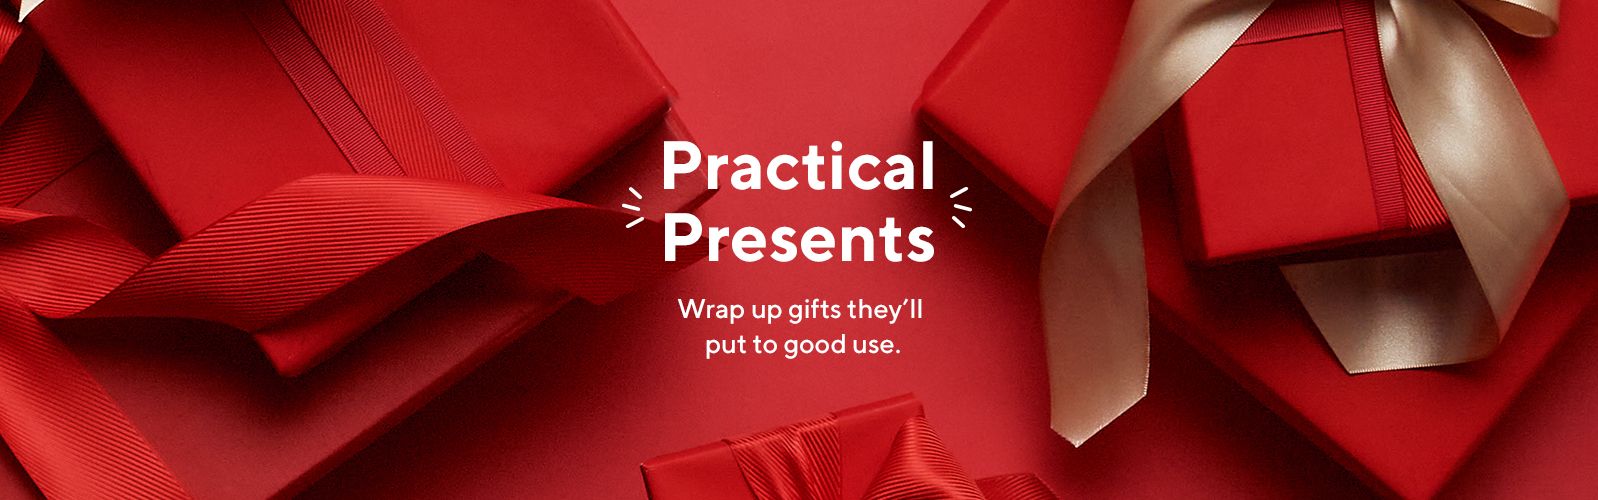 Practical Presents - Wrap up gifts they'll put to good use.